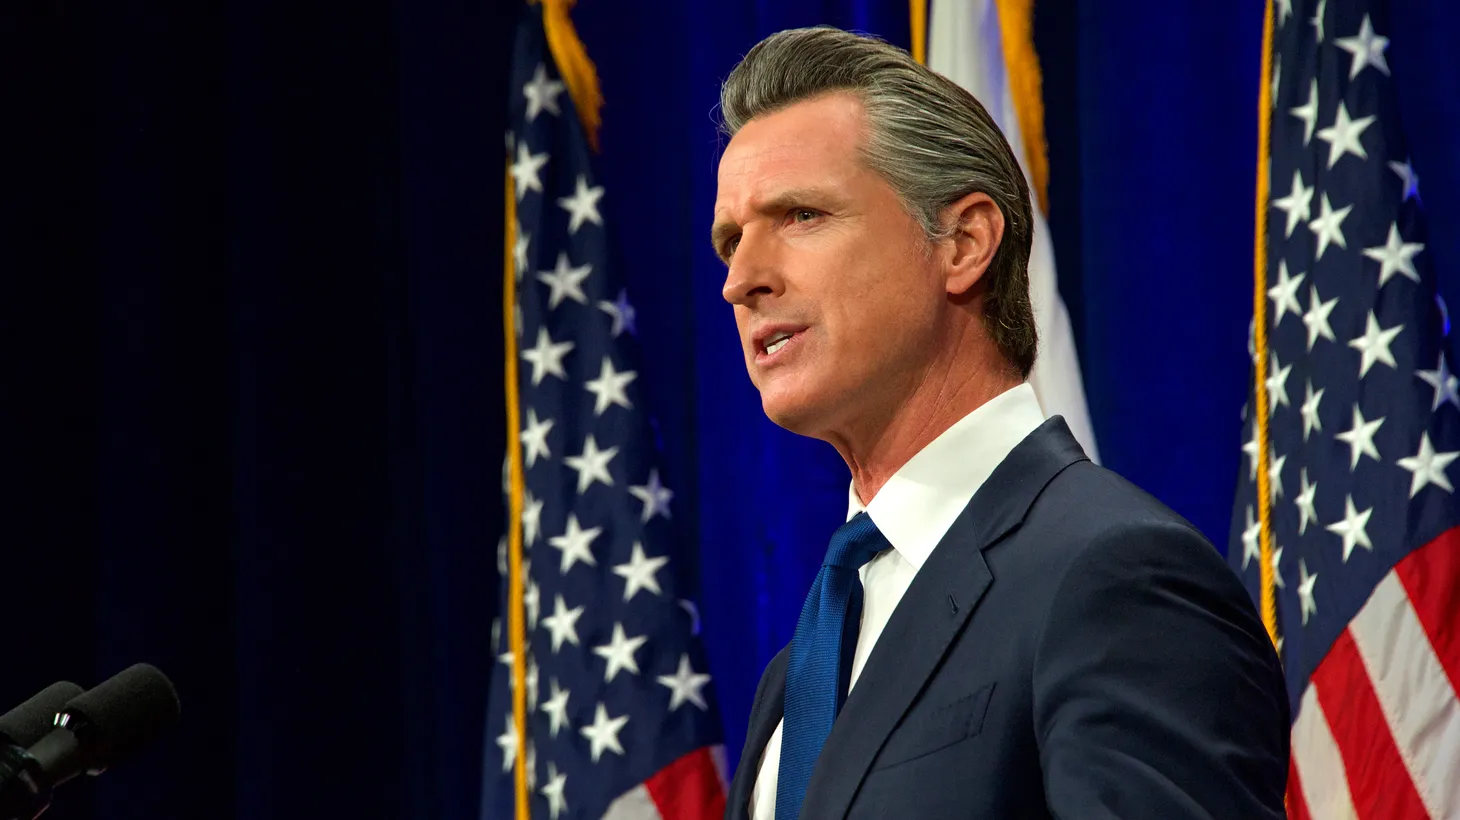 California Governor Gavin Newsom speaks at the State of the State address in Sacramento, CA, March 8, 2022.